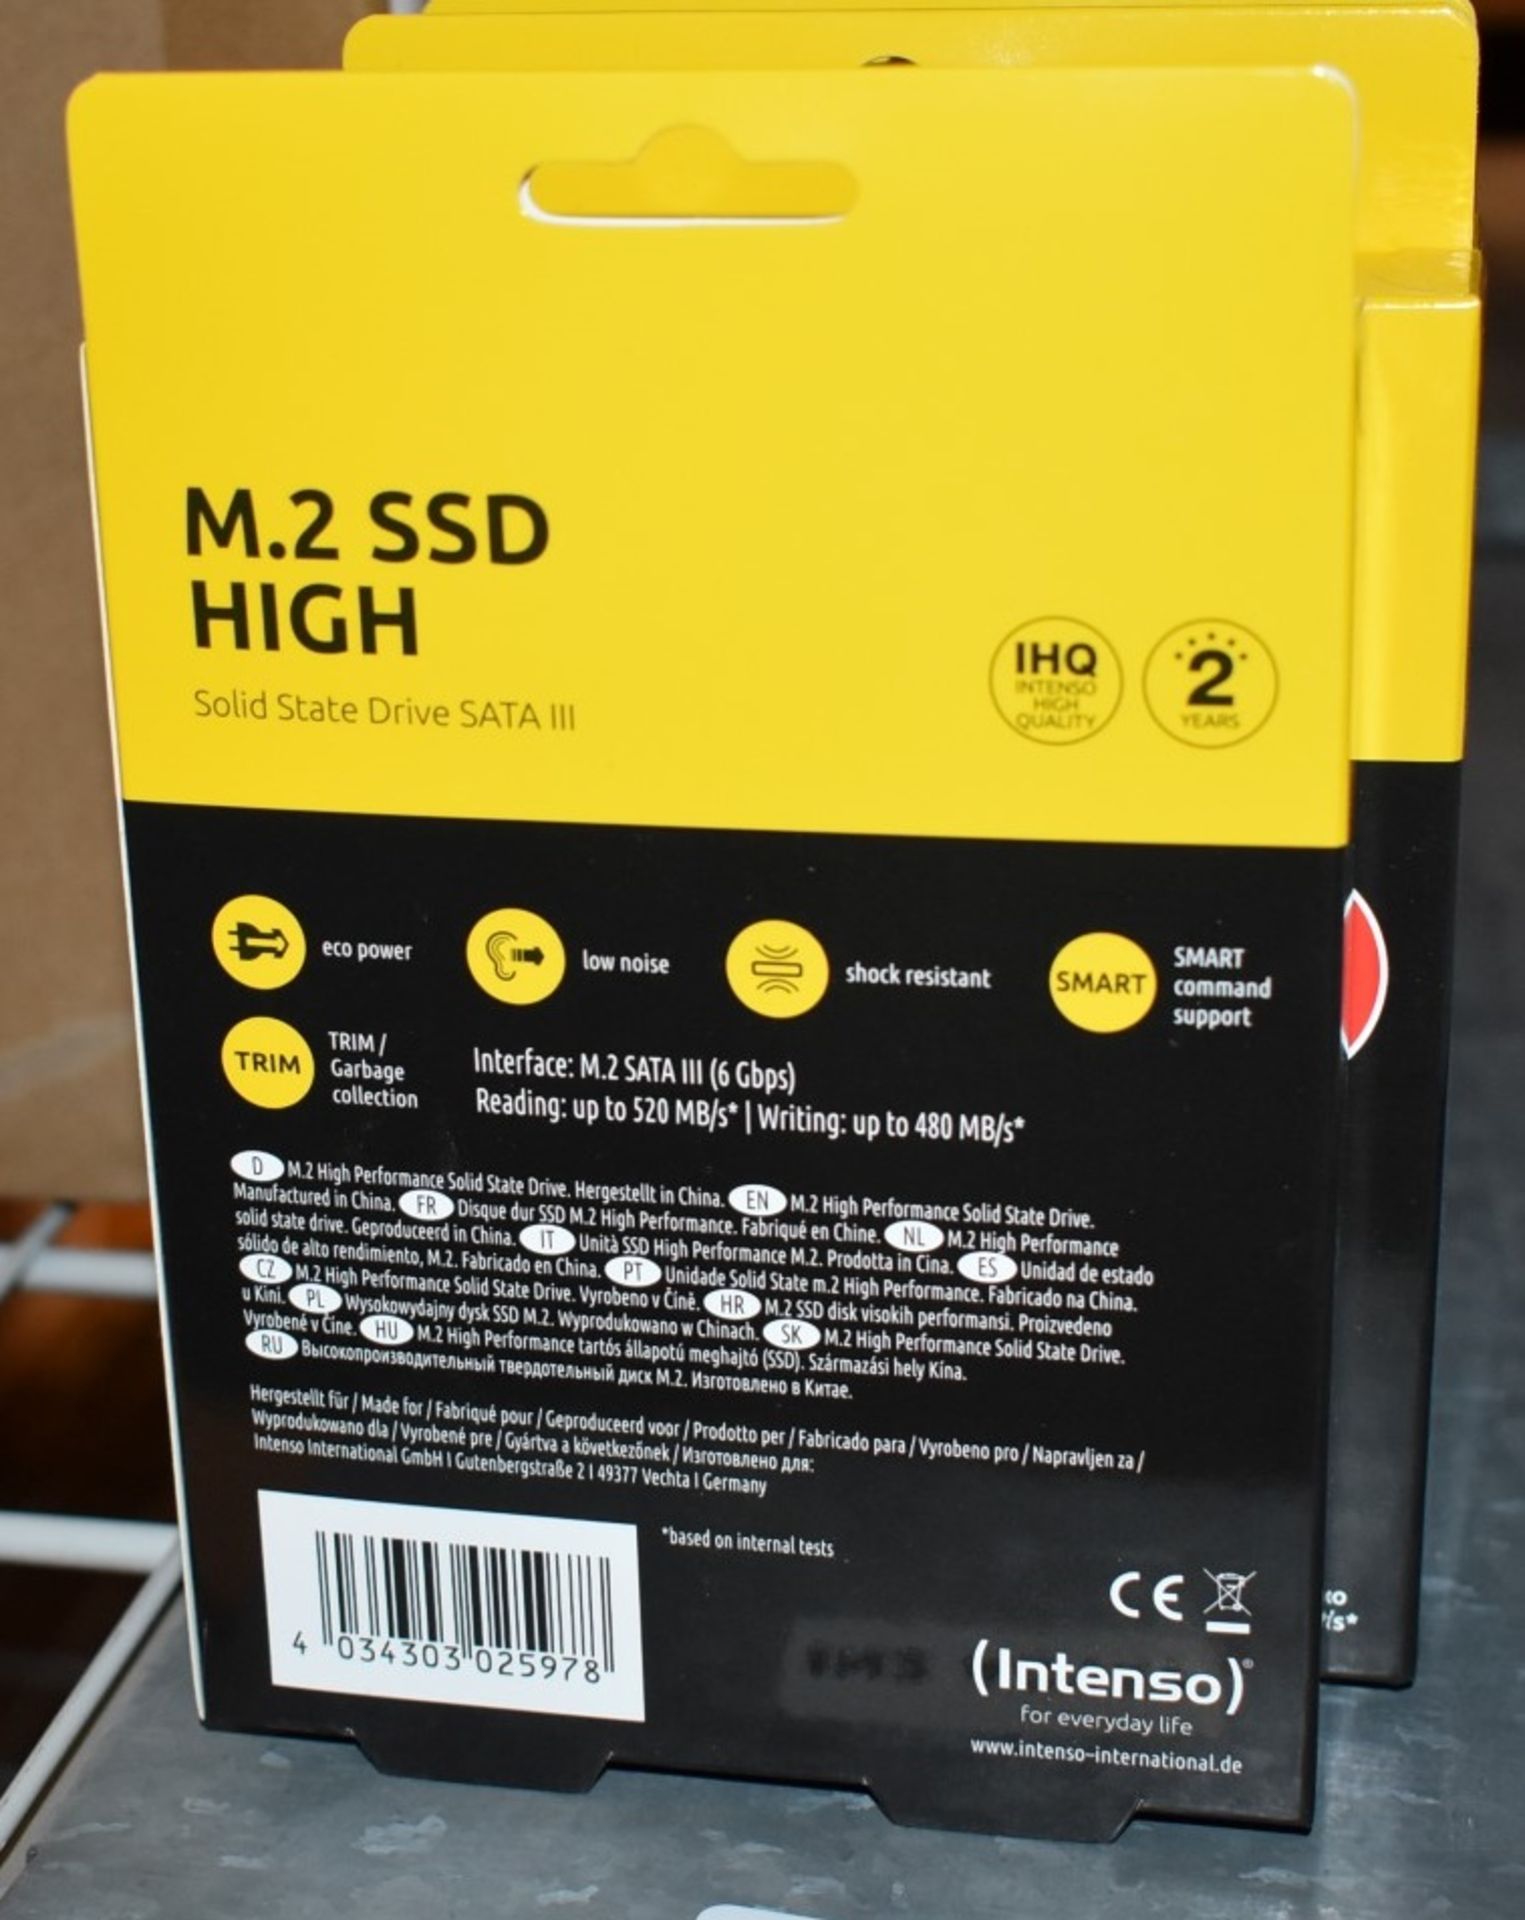 4 x Intenso M.2 Solid State 240gb SSD Hard Drive - New Boxed Stock - Ref: AC127 GFMR - CL646 - - Image 3 of 4